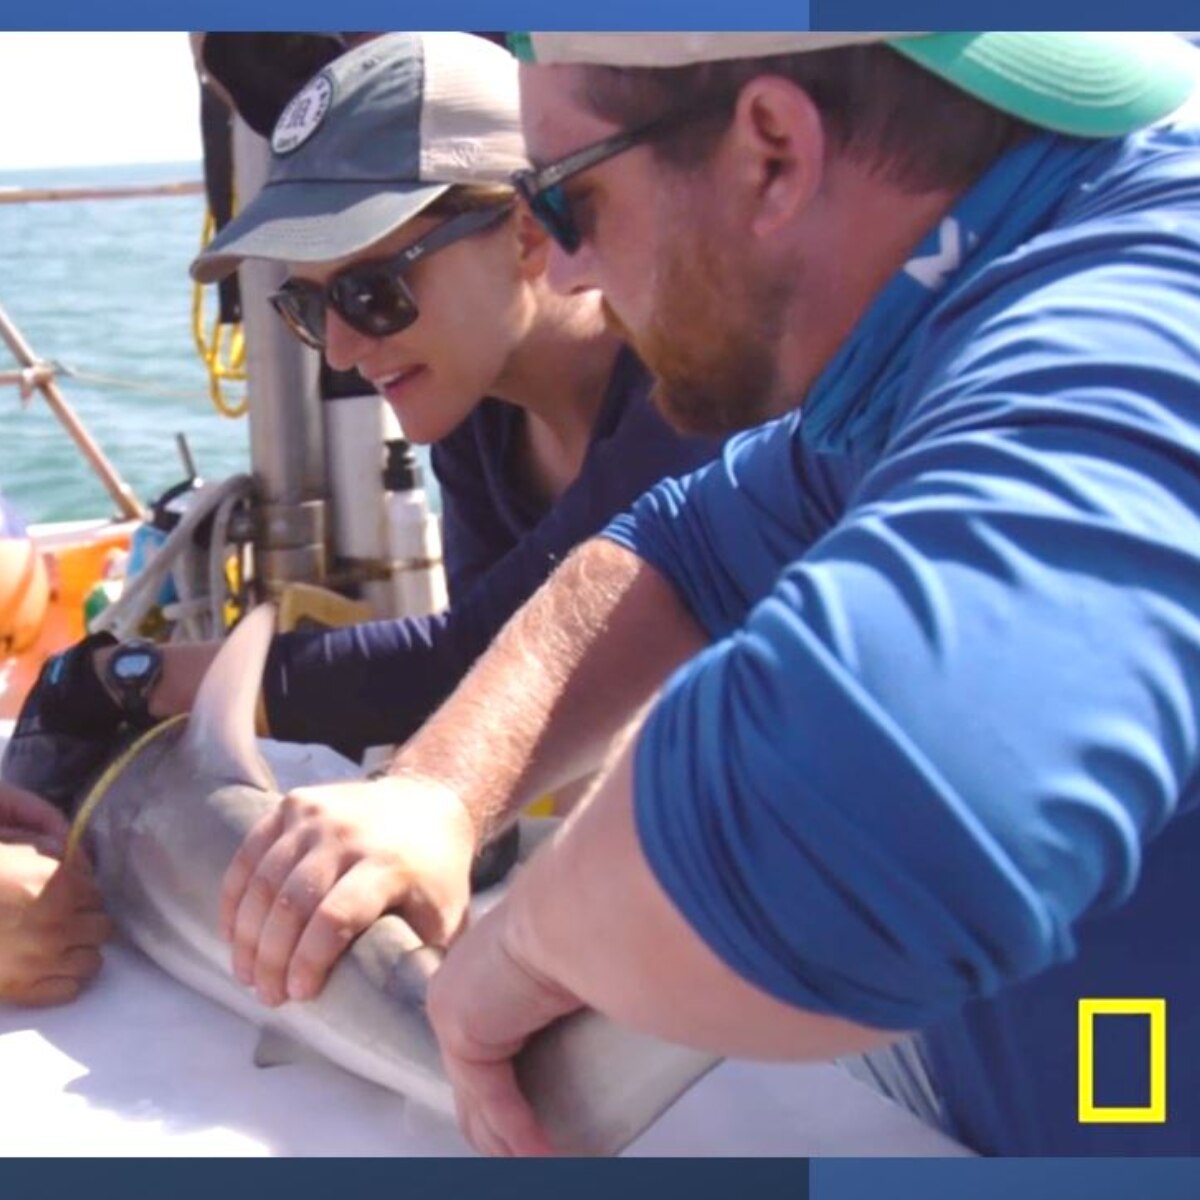 Archaeologist tagging sharks off the coast of Miami, Florida